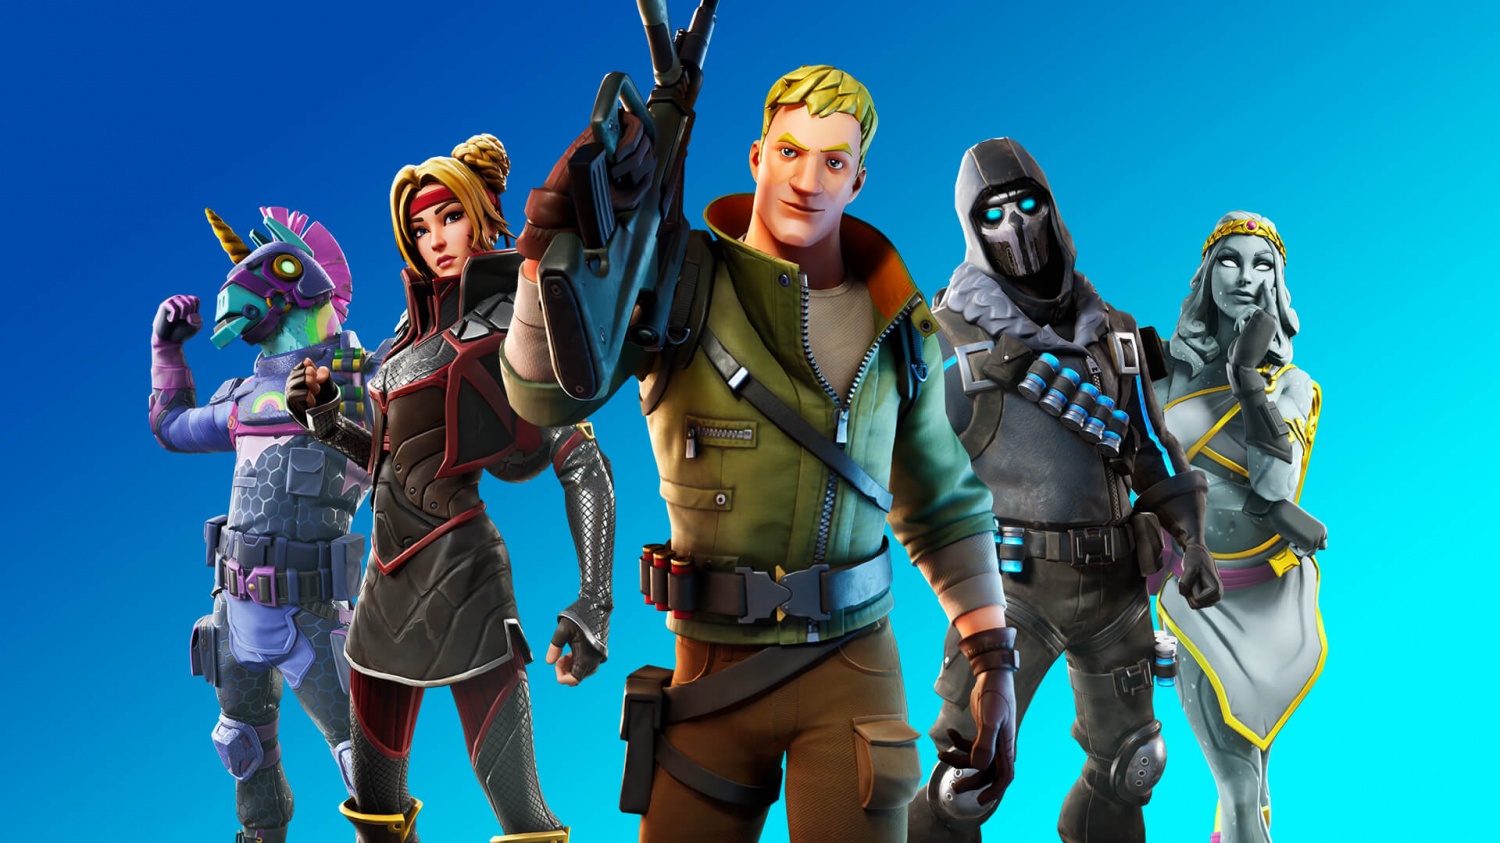 Watch How To Build A Fortified Fortnite Team This 2020—grind Your Way To The Top With Reliable